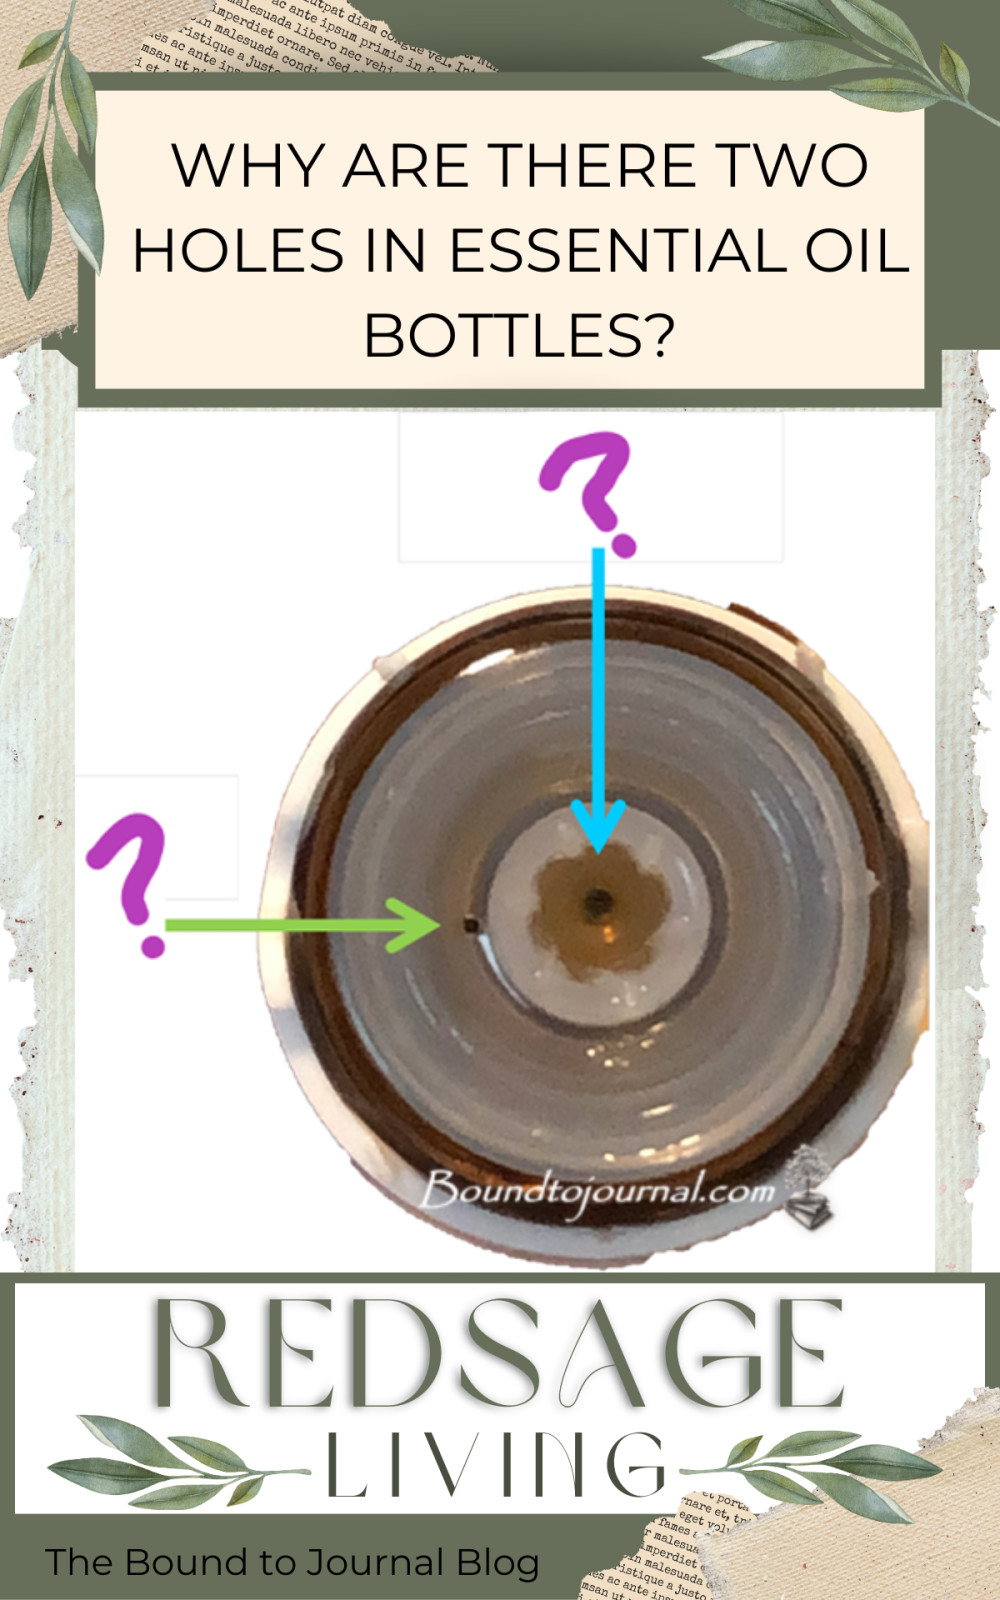 Why Two Holes in an Essential Oil Bottle?